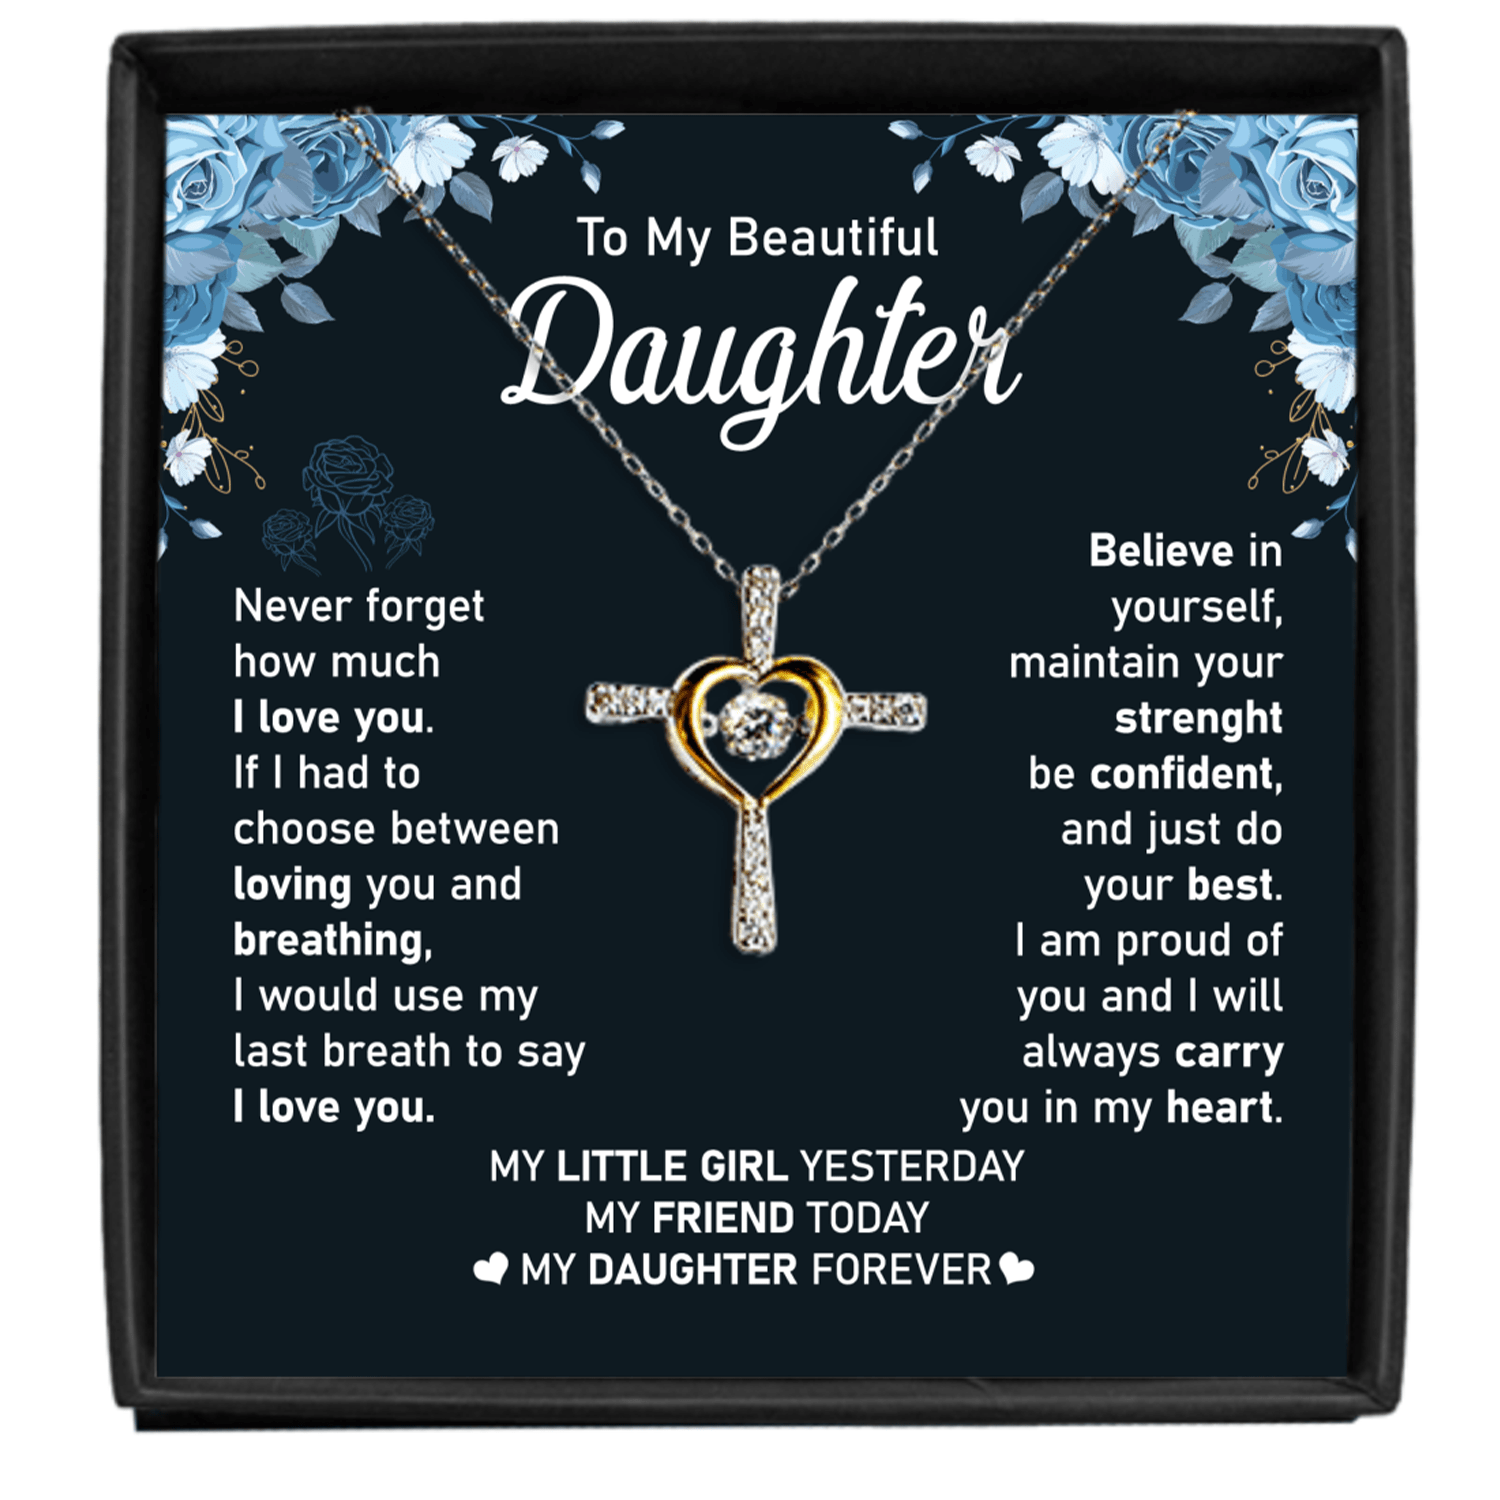 Gift For Daughter - Believe In Yourself - Cross Dancing Necklace With Message Card - Gift For Birthday, Christmas From Dad, Father, Mom, Mother